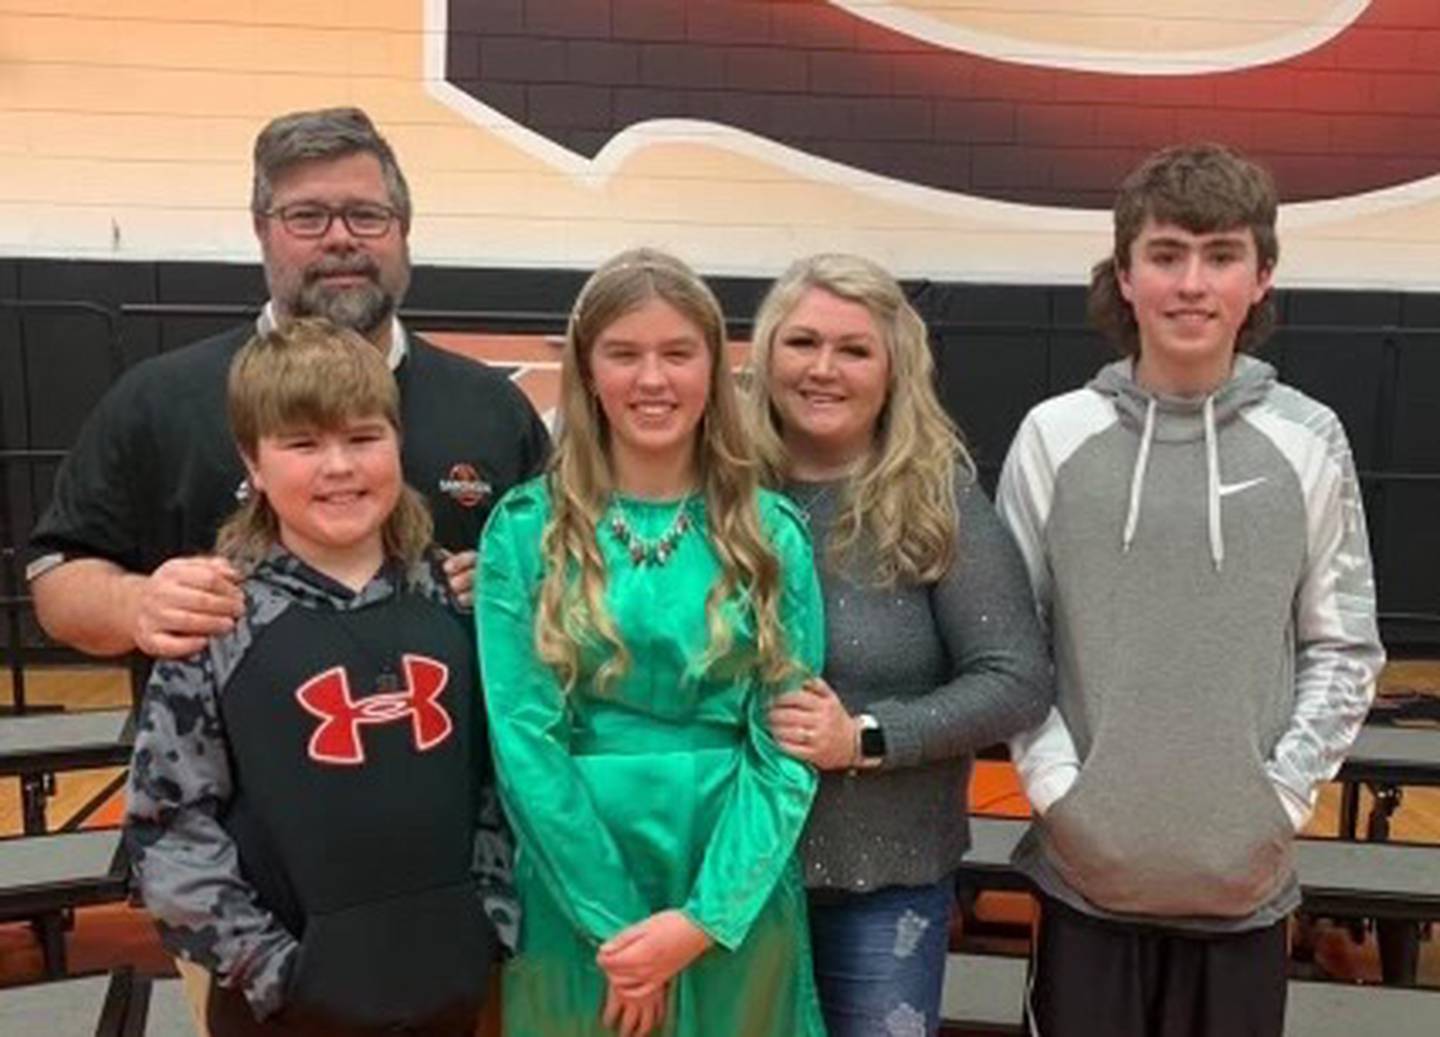 Dusty Behringer and his family. (From left to right: Dusty, Tanner, Ashlyn, Beth and Braden Behringer.)